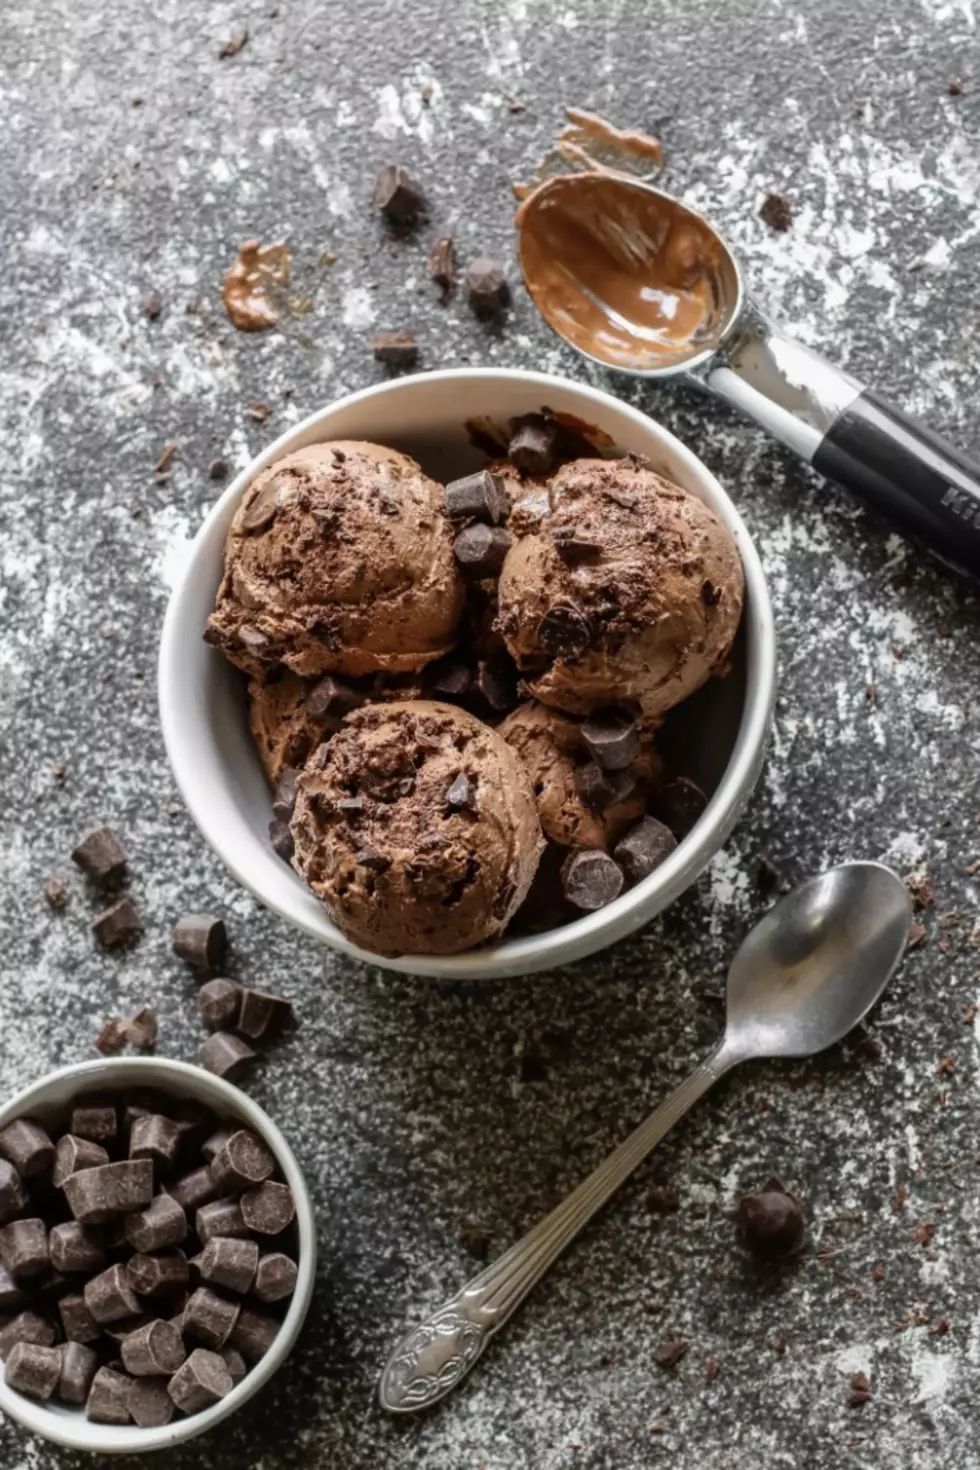 Celebrate National Chocolate Ice Cream Day with This Dairy-Free Recipe